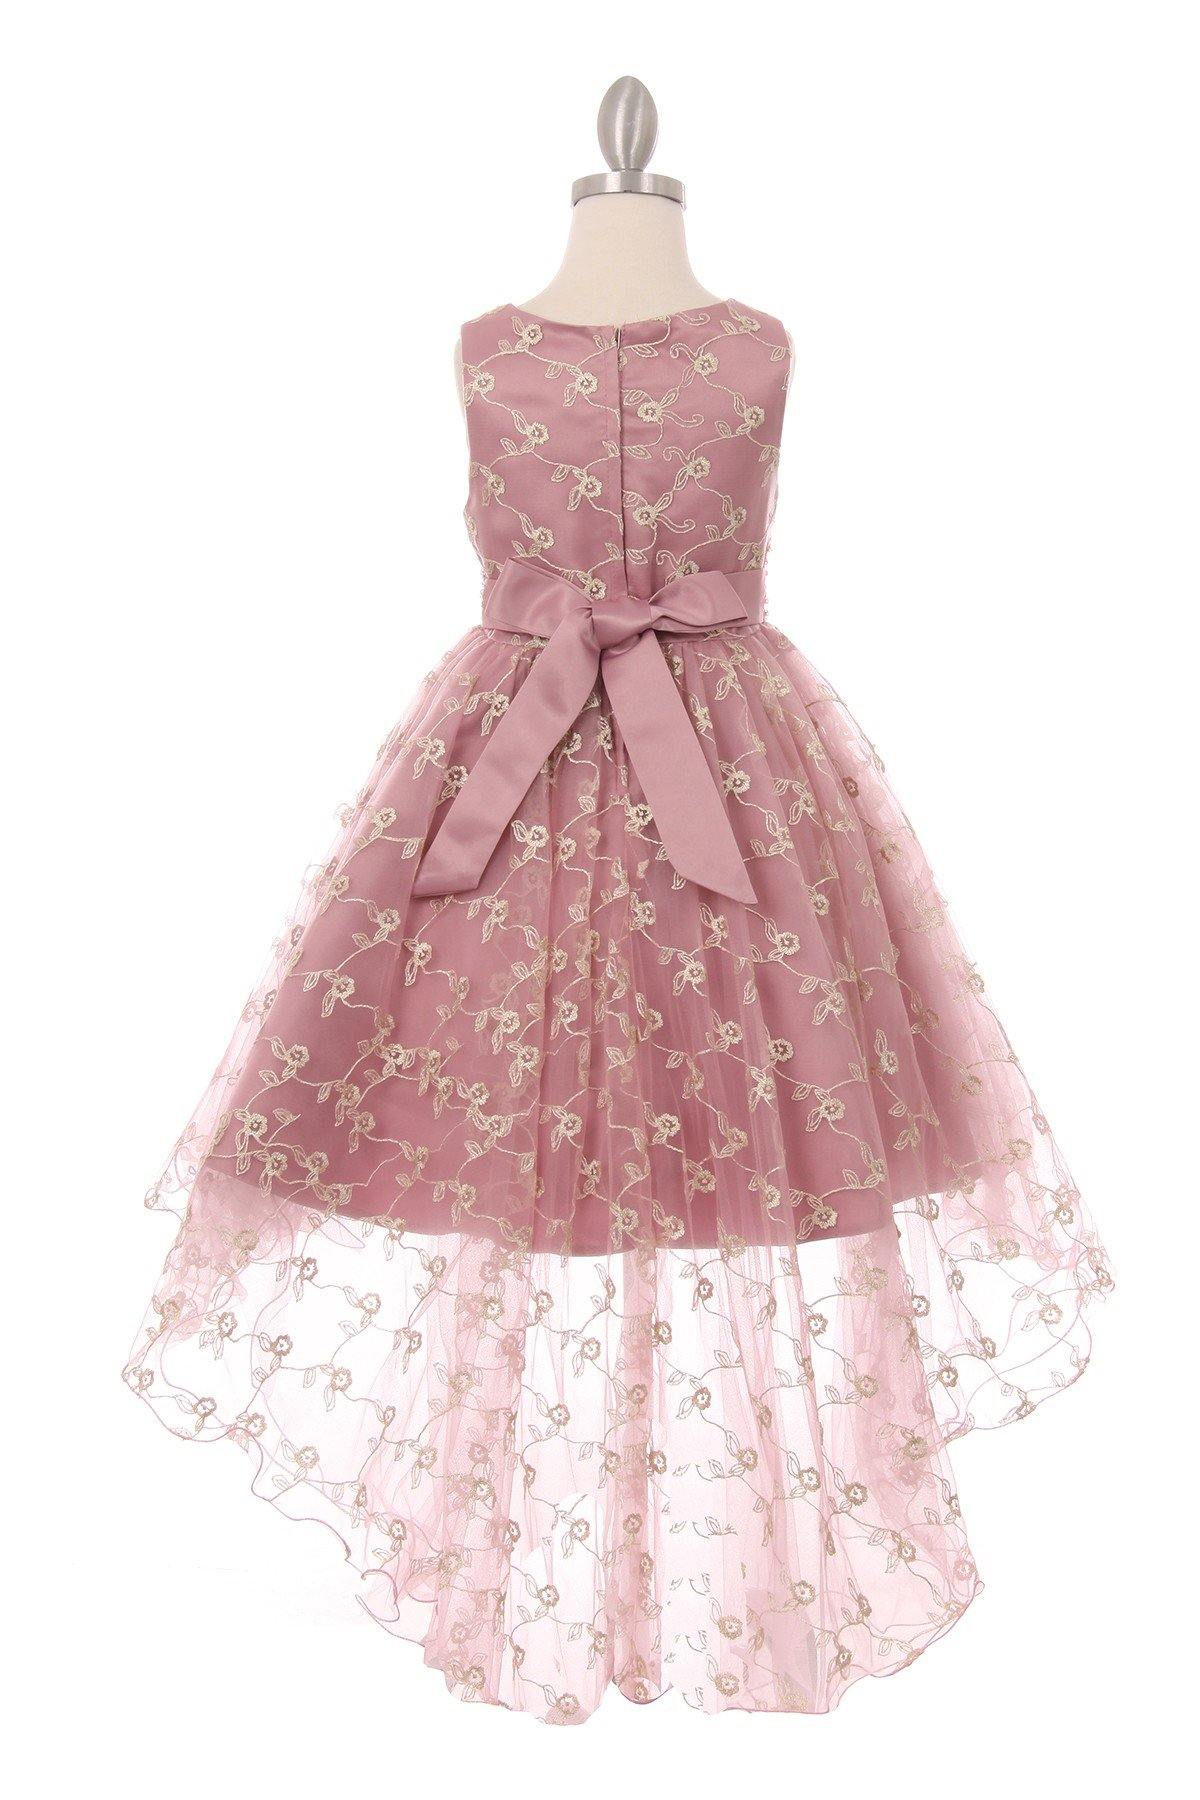 Sleeveless Embroidery Flower Girls Dress - The Dress Outlet Cinderella Couture